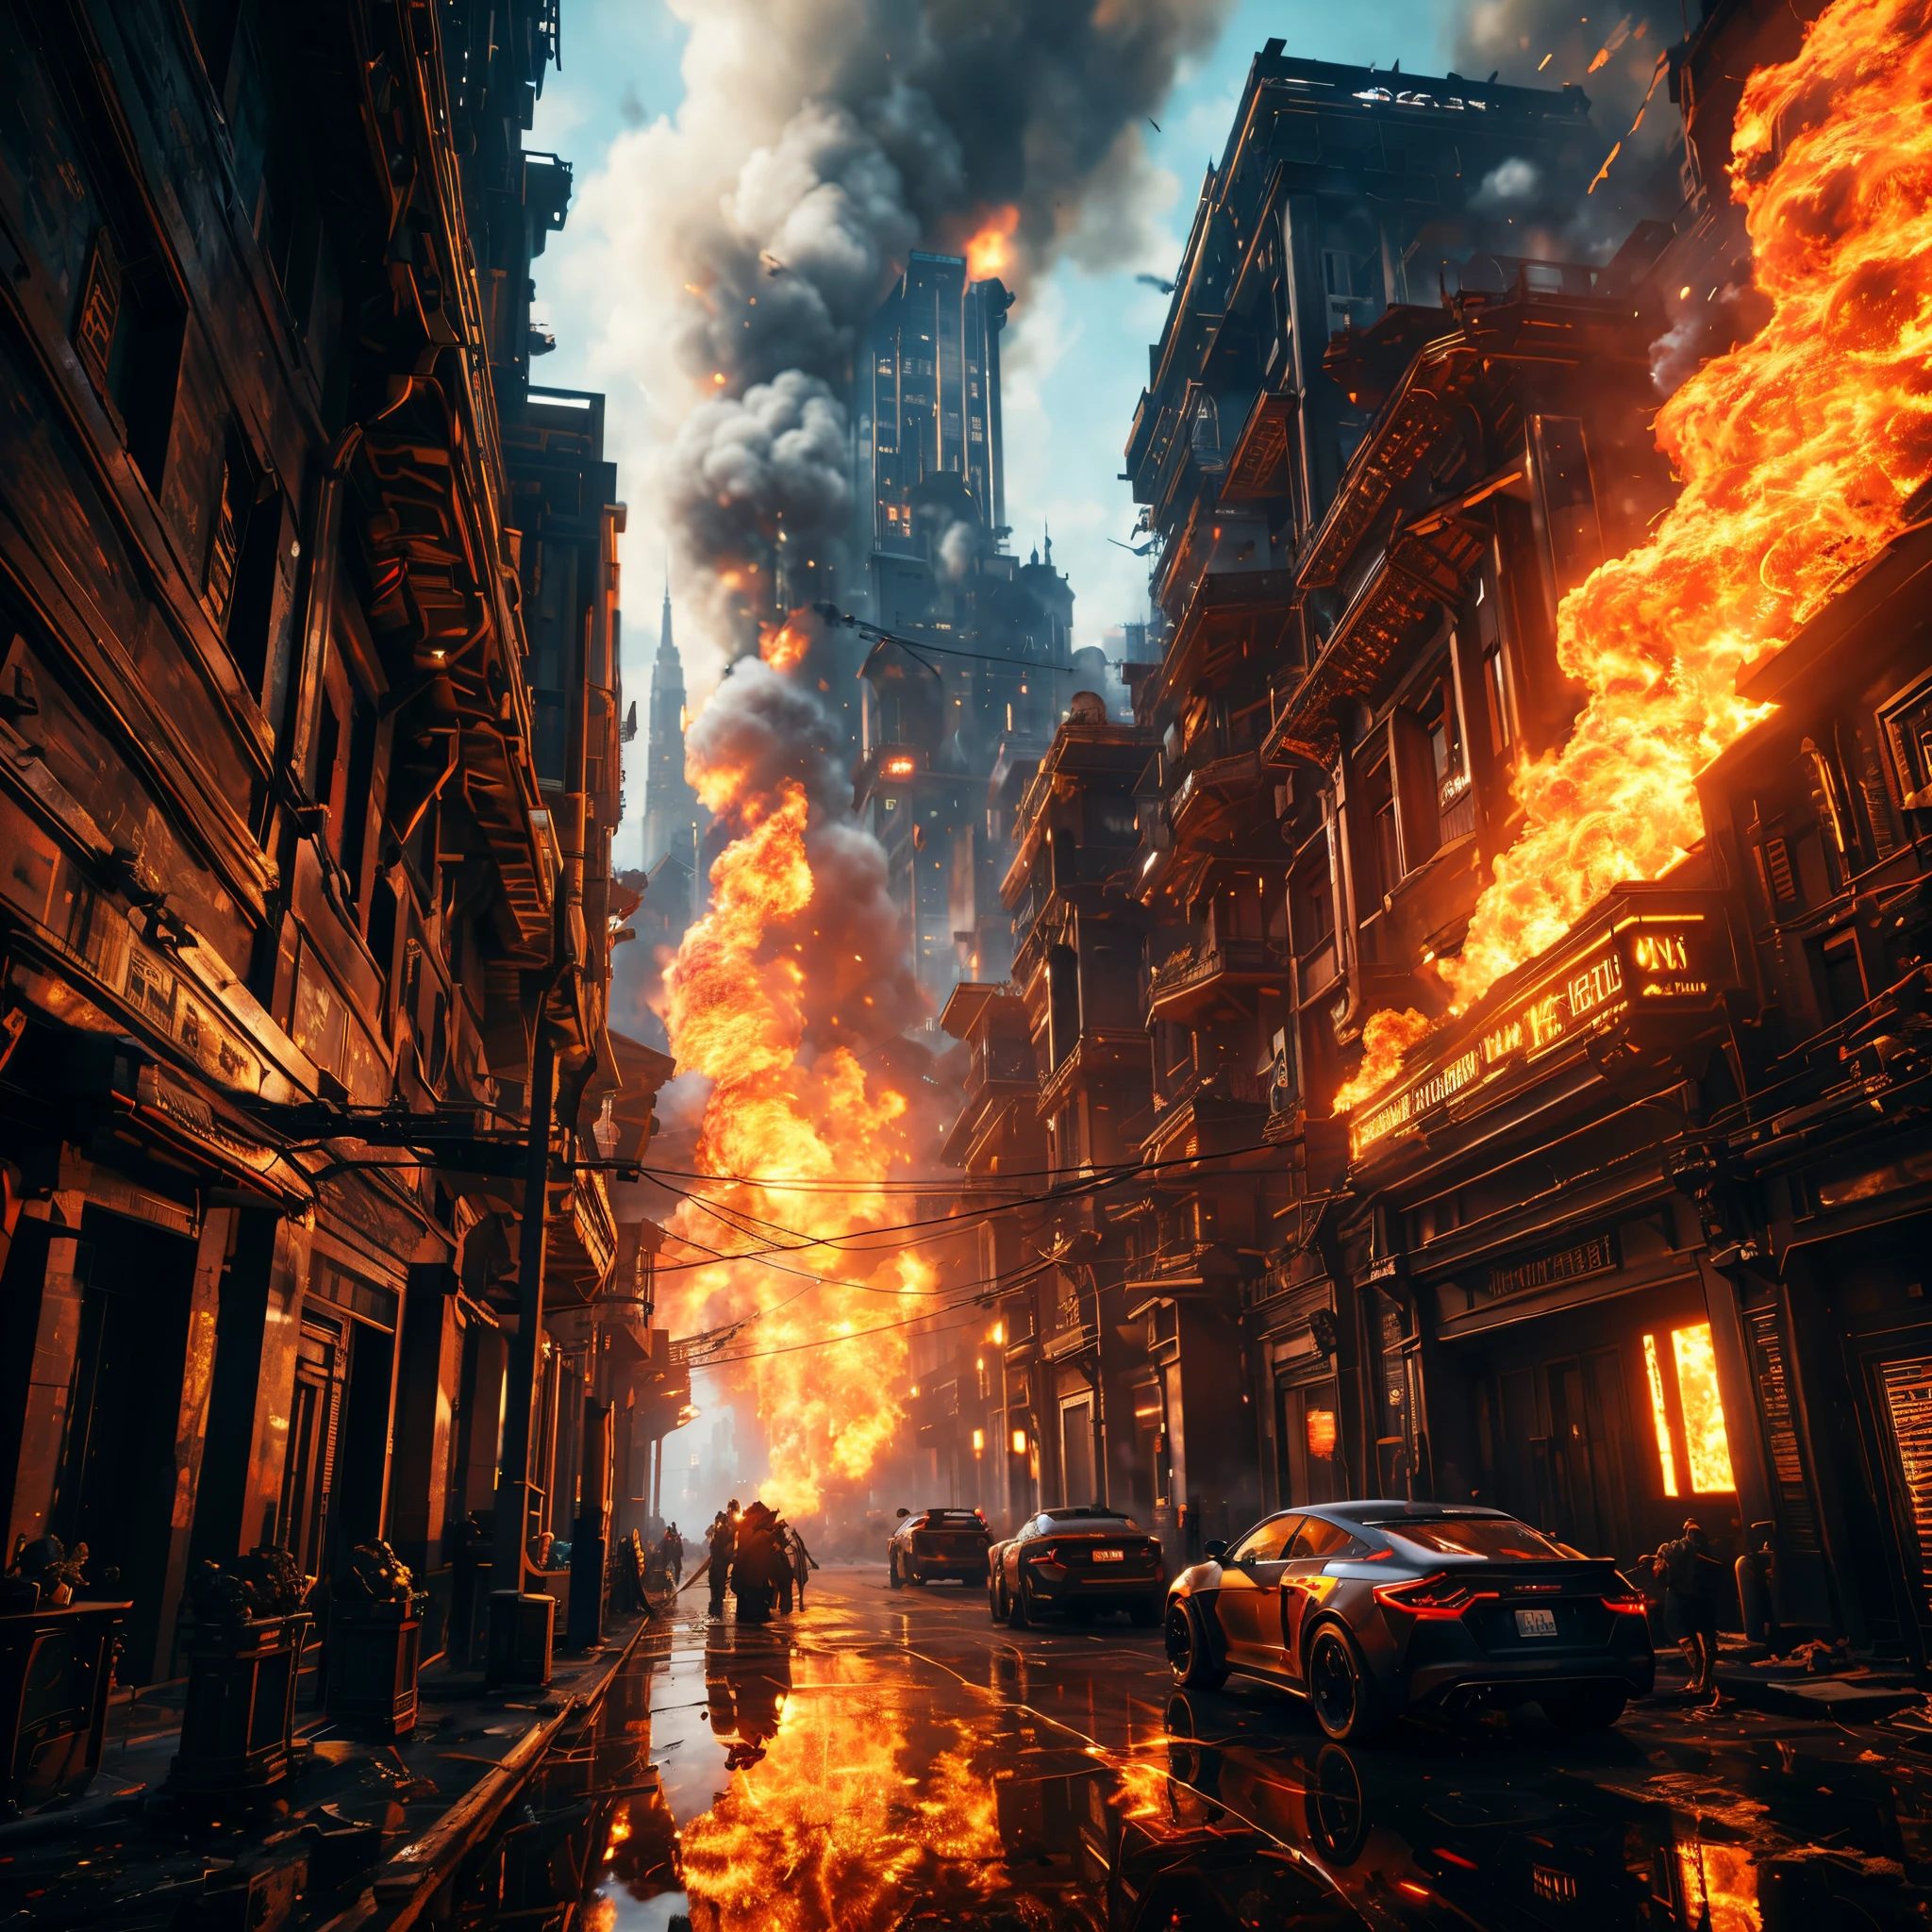 flames are seen in the streets of a city during a fire, destroyed city on fire, riot in a cyberpunk city, post - apocalyptic city streets, the buildings are on fire, cyberpunk apocalyptic city, city on fire, the city  on fire, burning city in background, city street cinematic lighting, cyberpunk art ultrarealistic 8k, burning city background